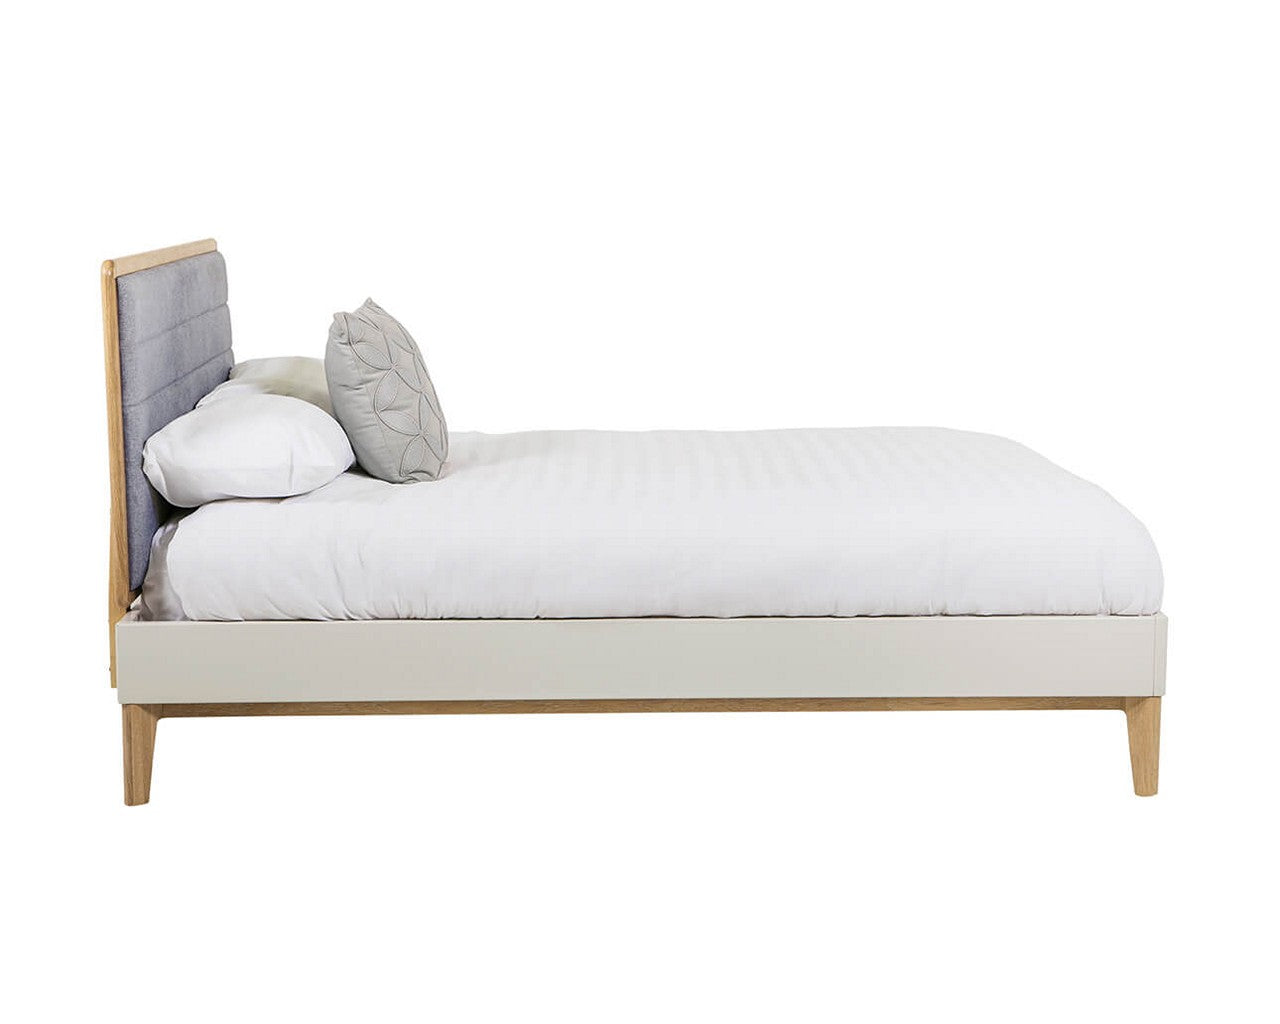 Marlow Bed